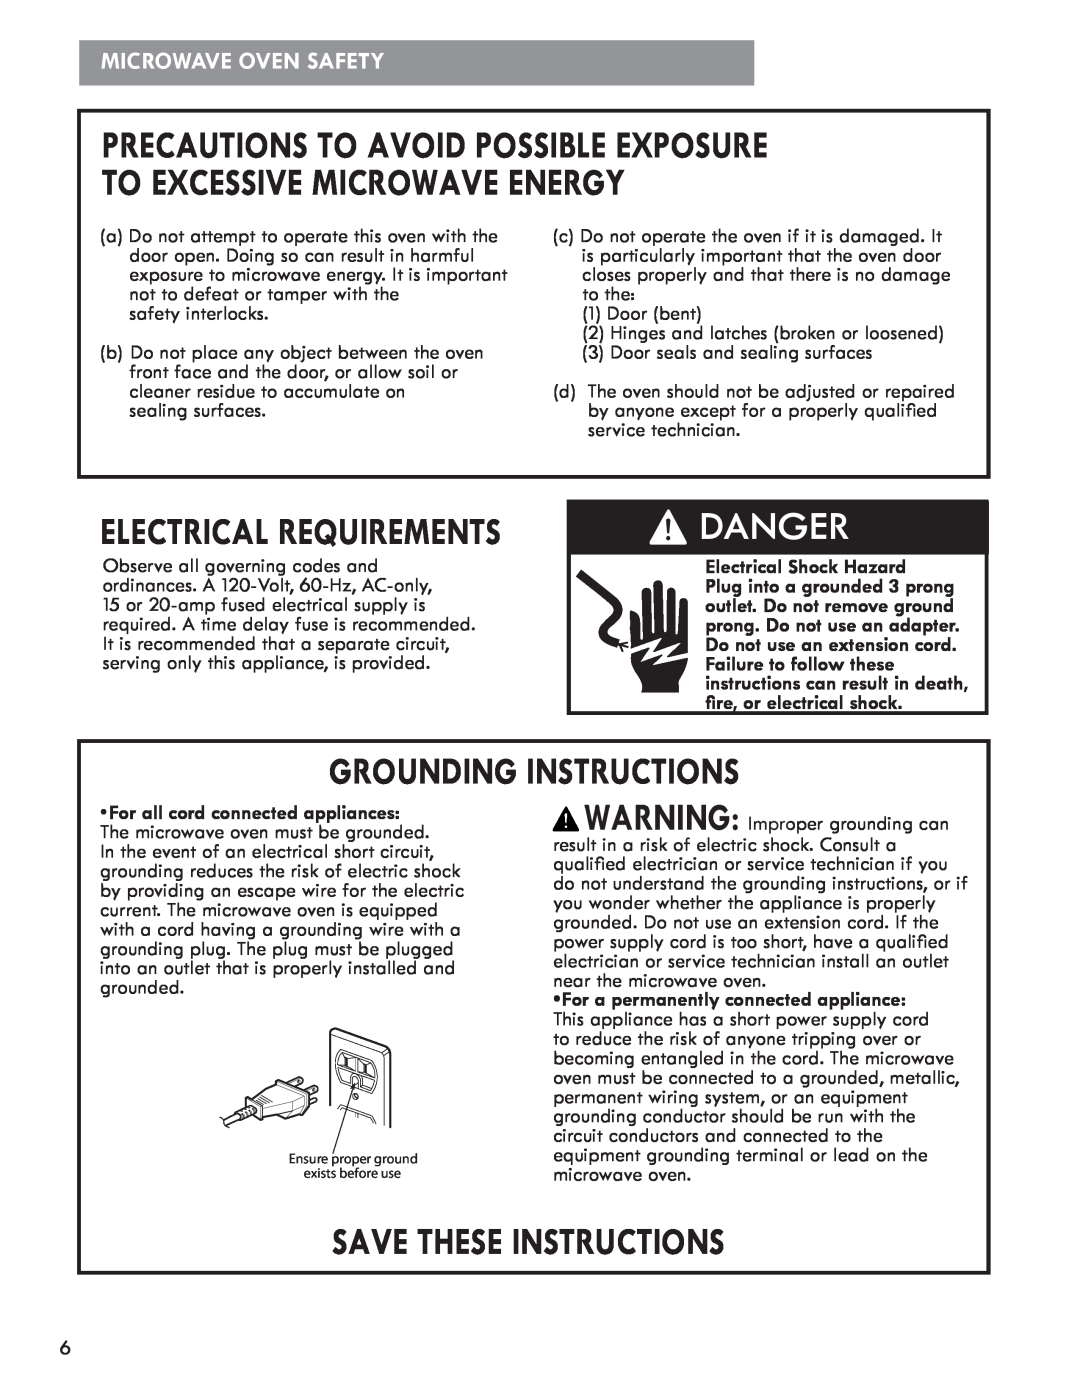 Kenmore 721.8502 Grounding Instructions, Danger, Save These Instructions, Electrical Requirements, Microwave Oven Safety 